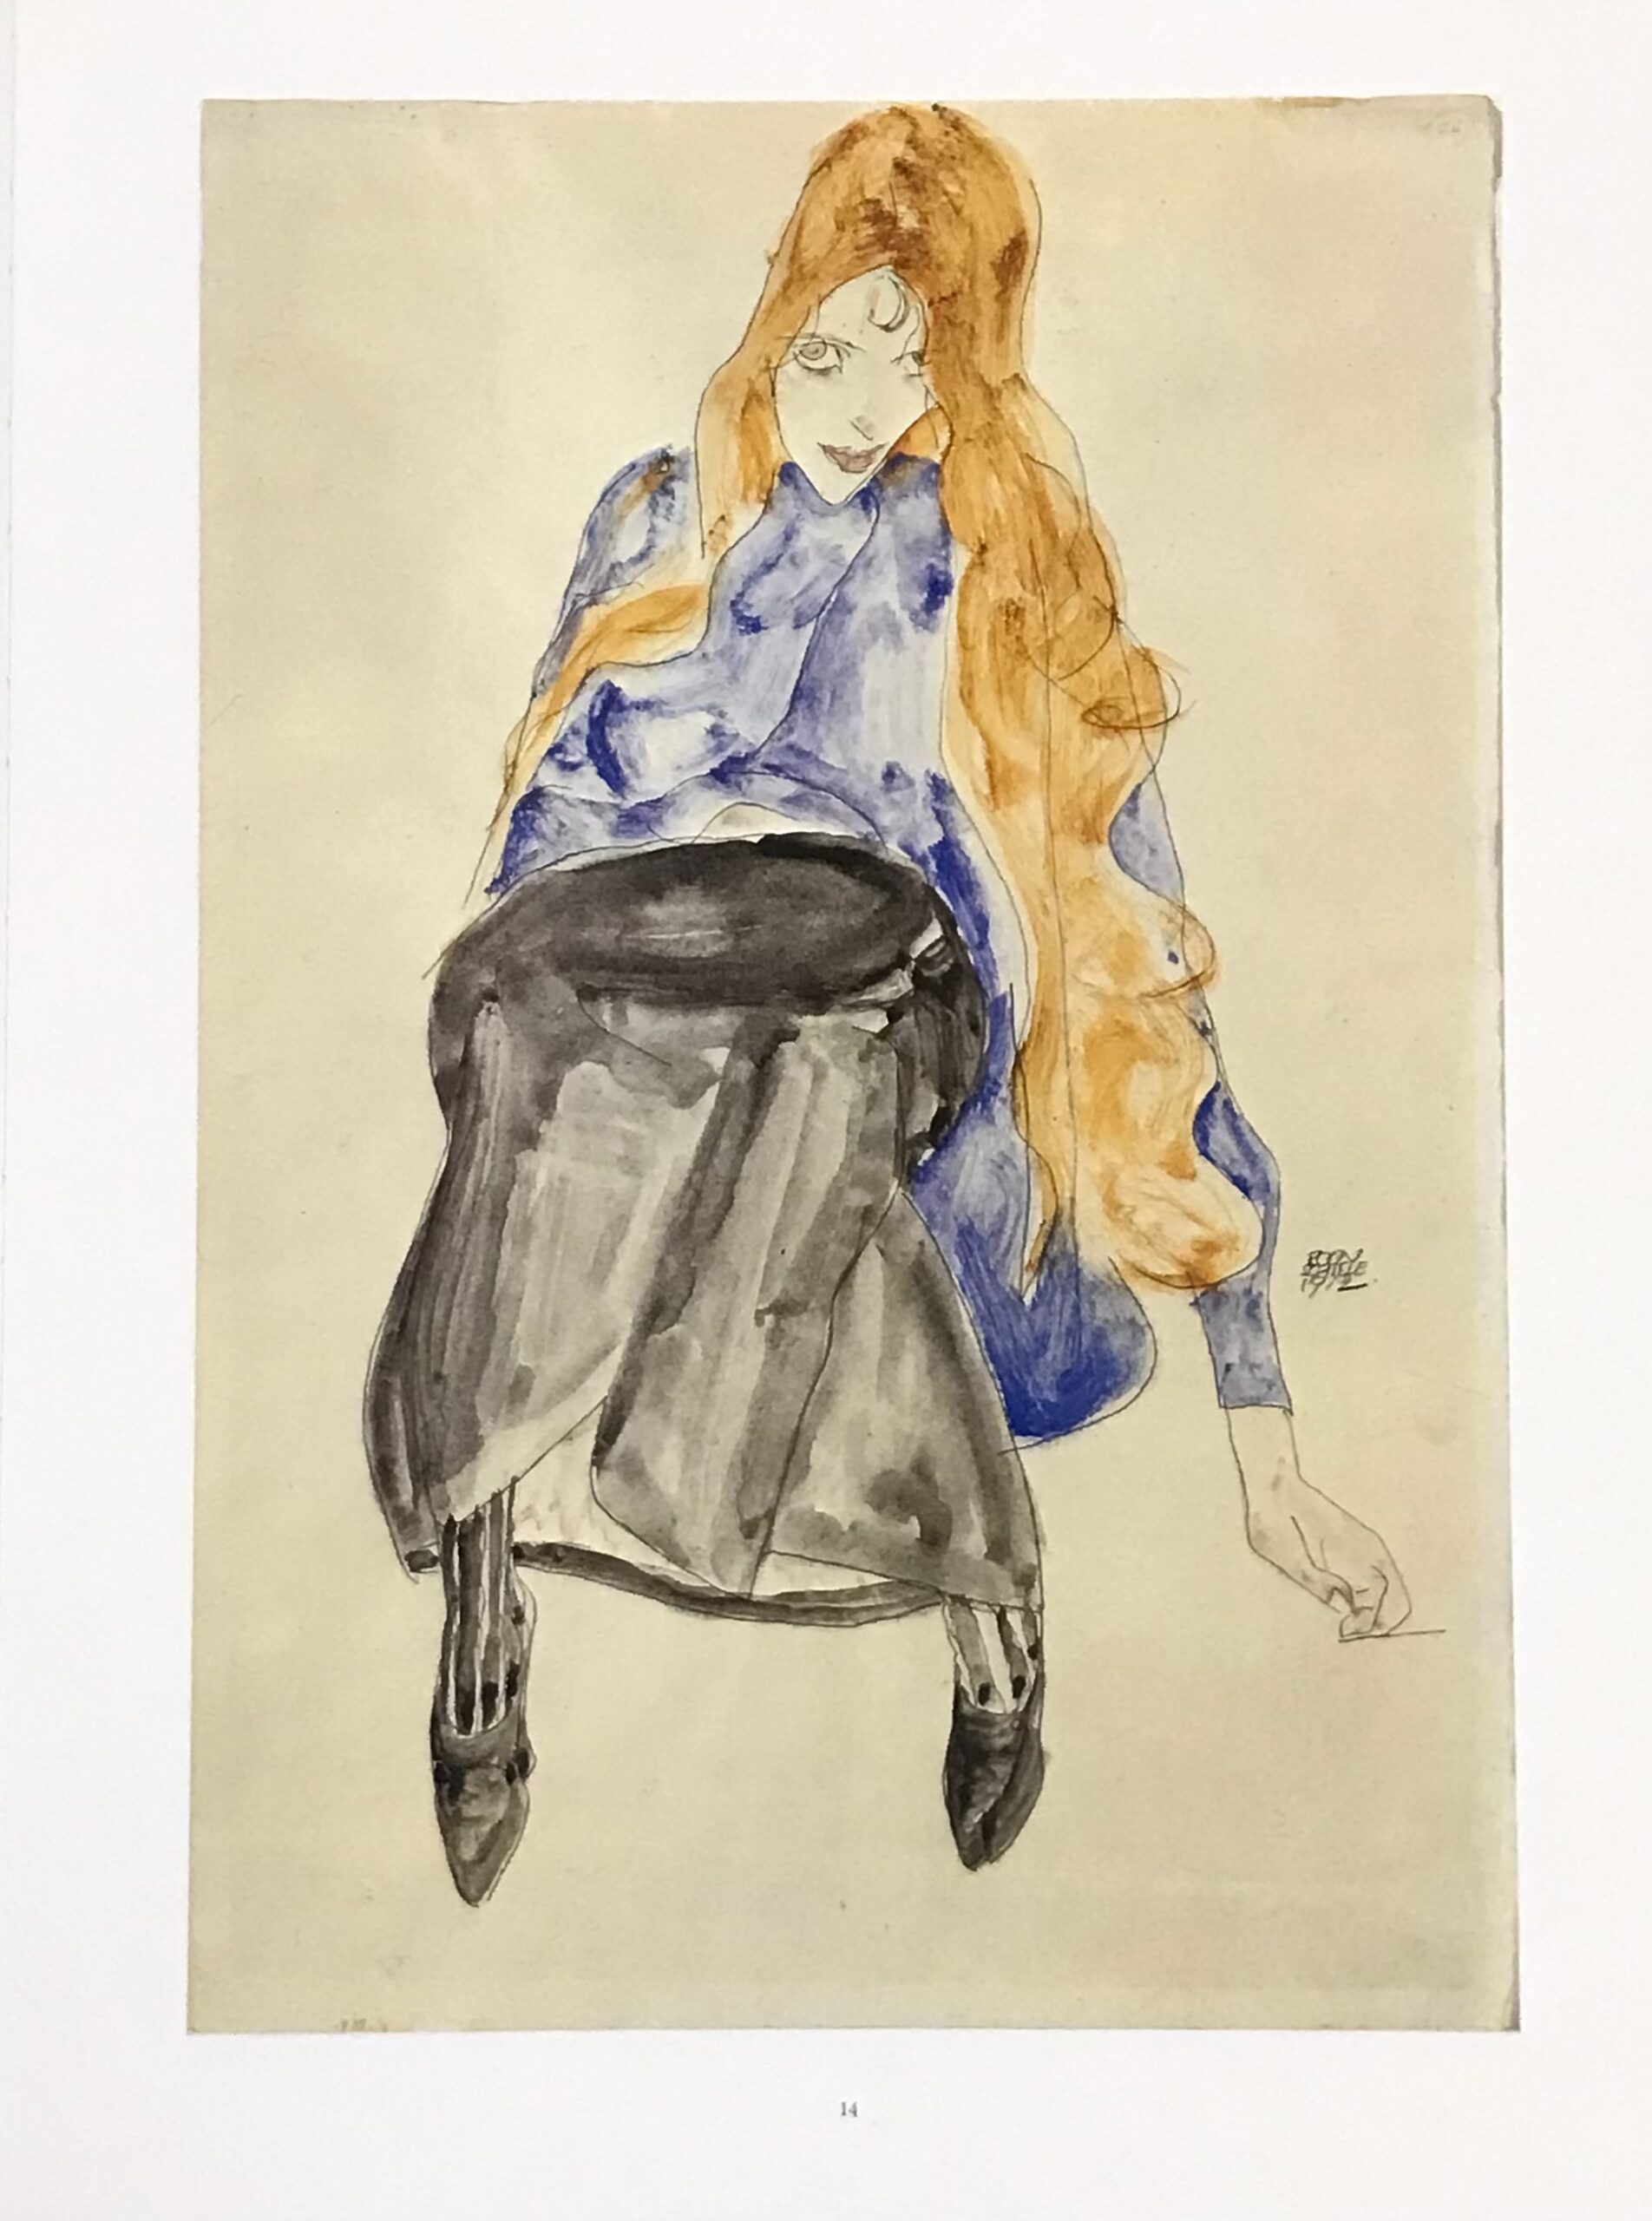 1981 Egon Schiele 14 Erotic Drawing Seated girl with blond hair